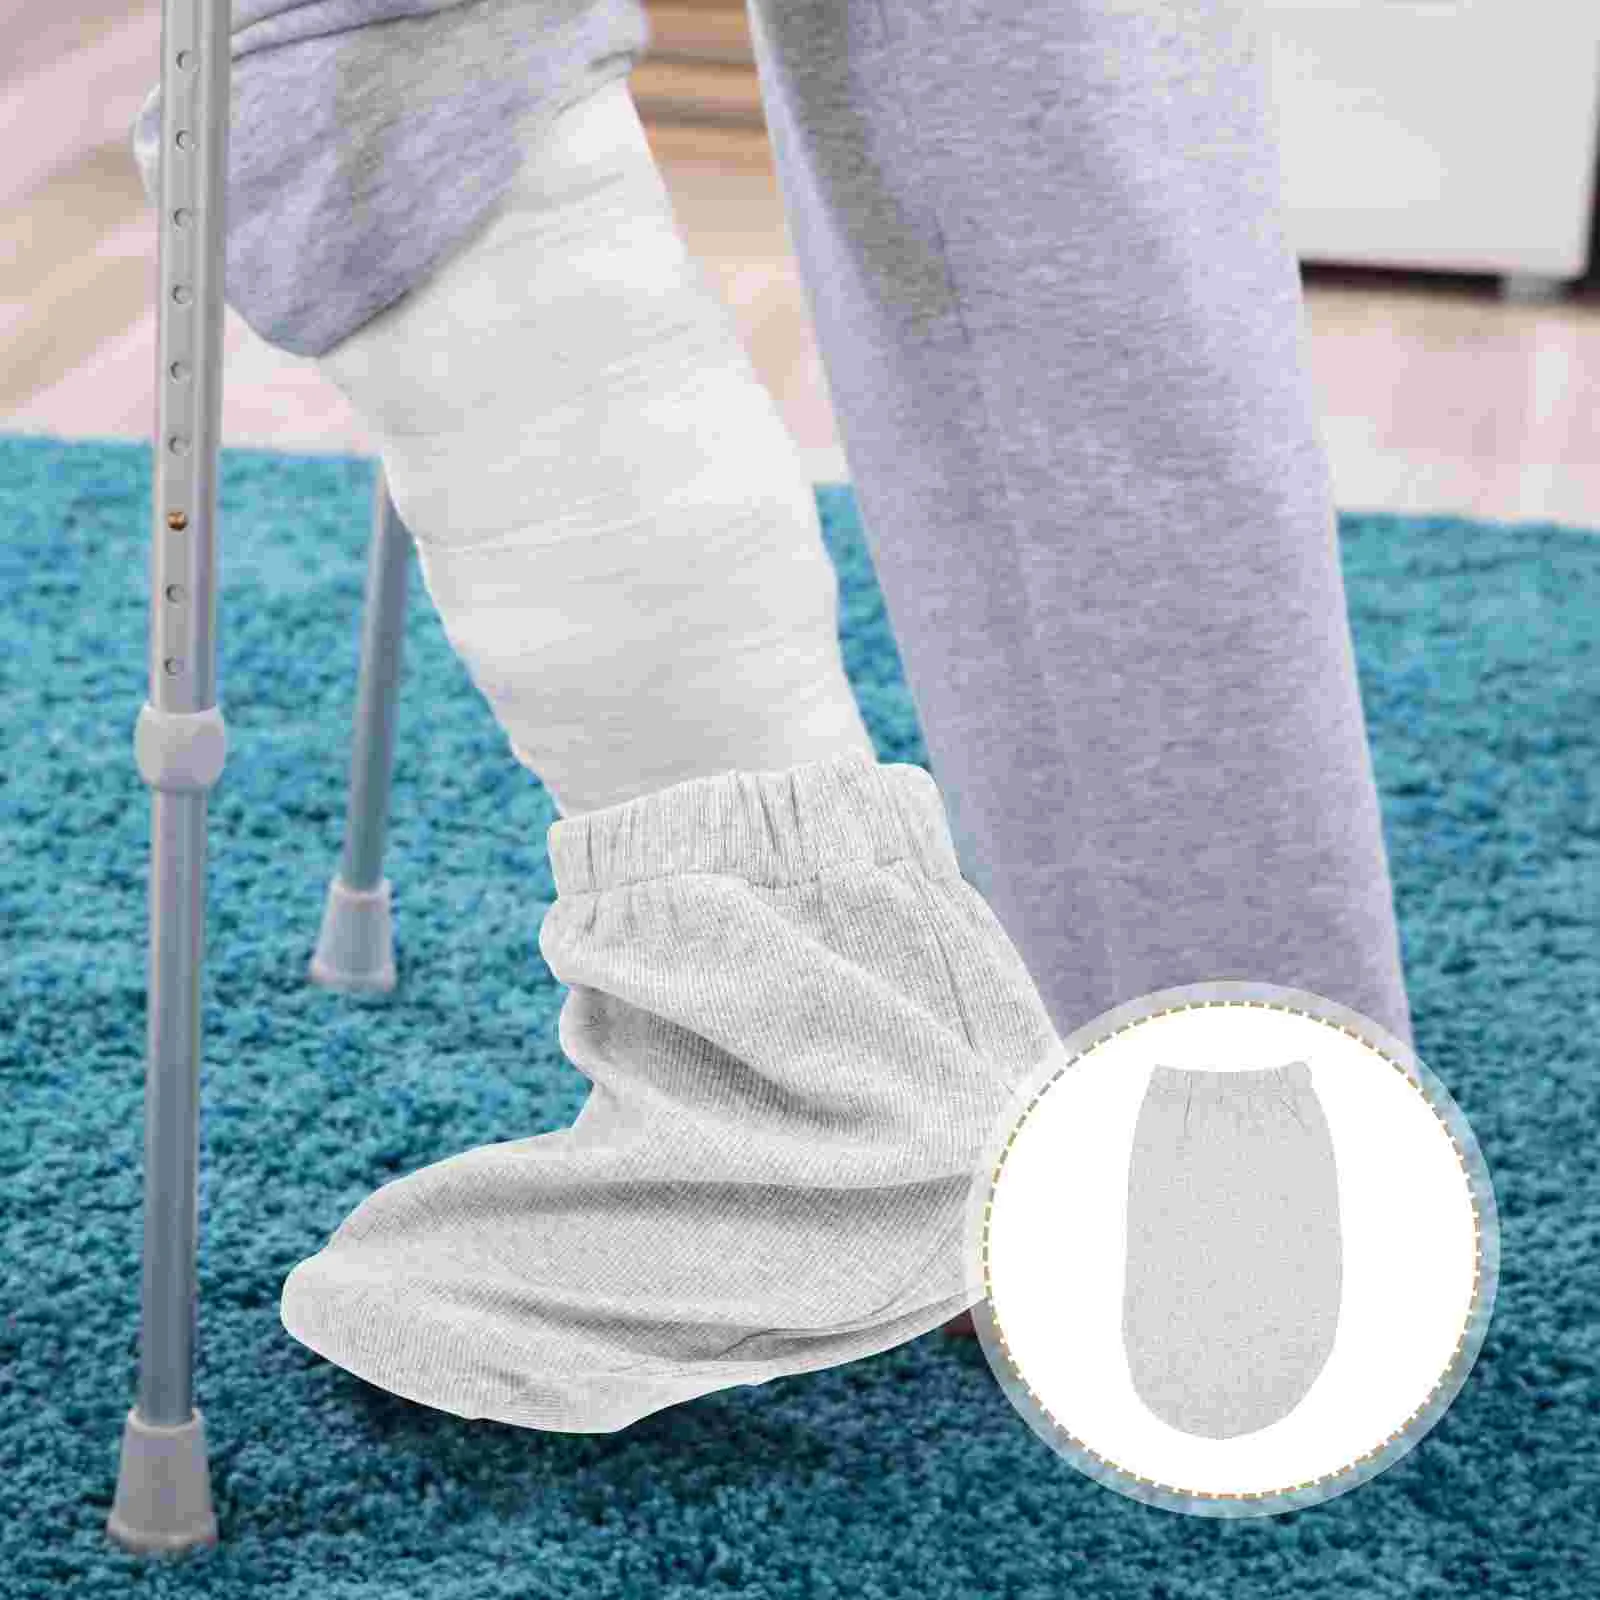 

Sock Cover Foot Gypsum Warm Cast Socks Nursing Toe Caring Cotton Breathable Covers Protector Loose Orthotic Walking Men Care